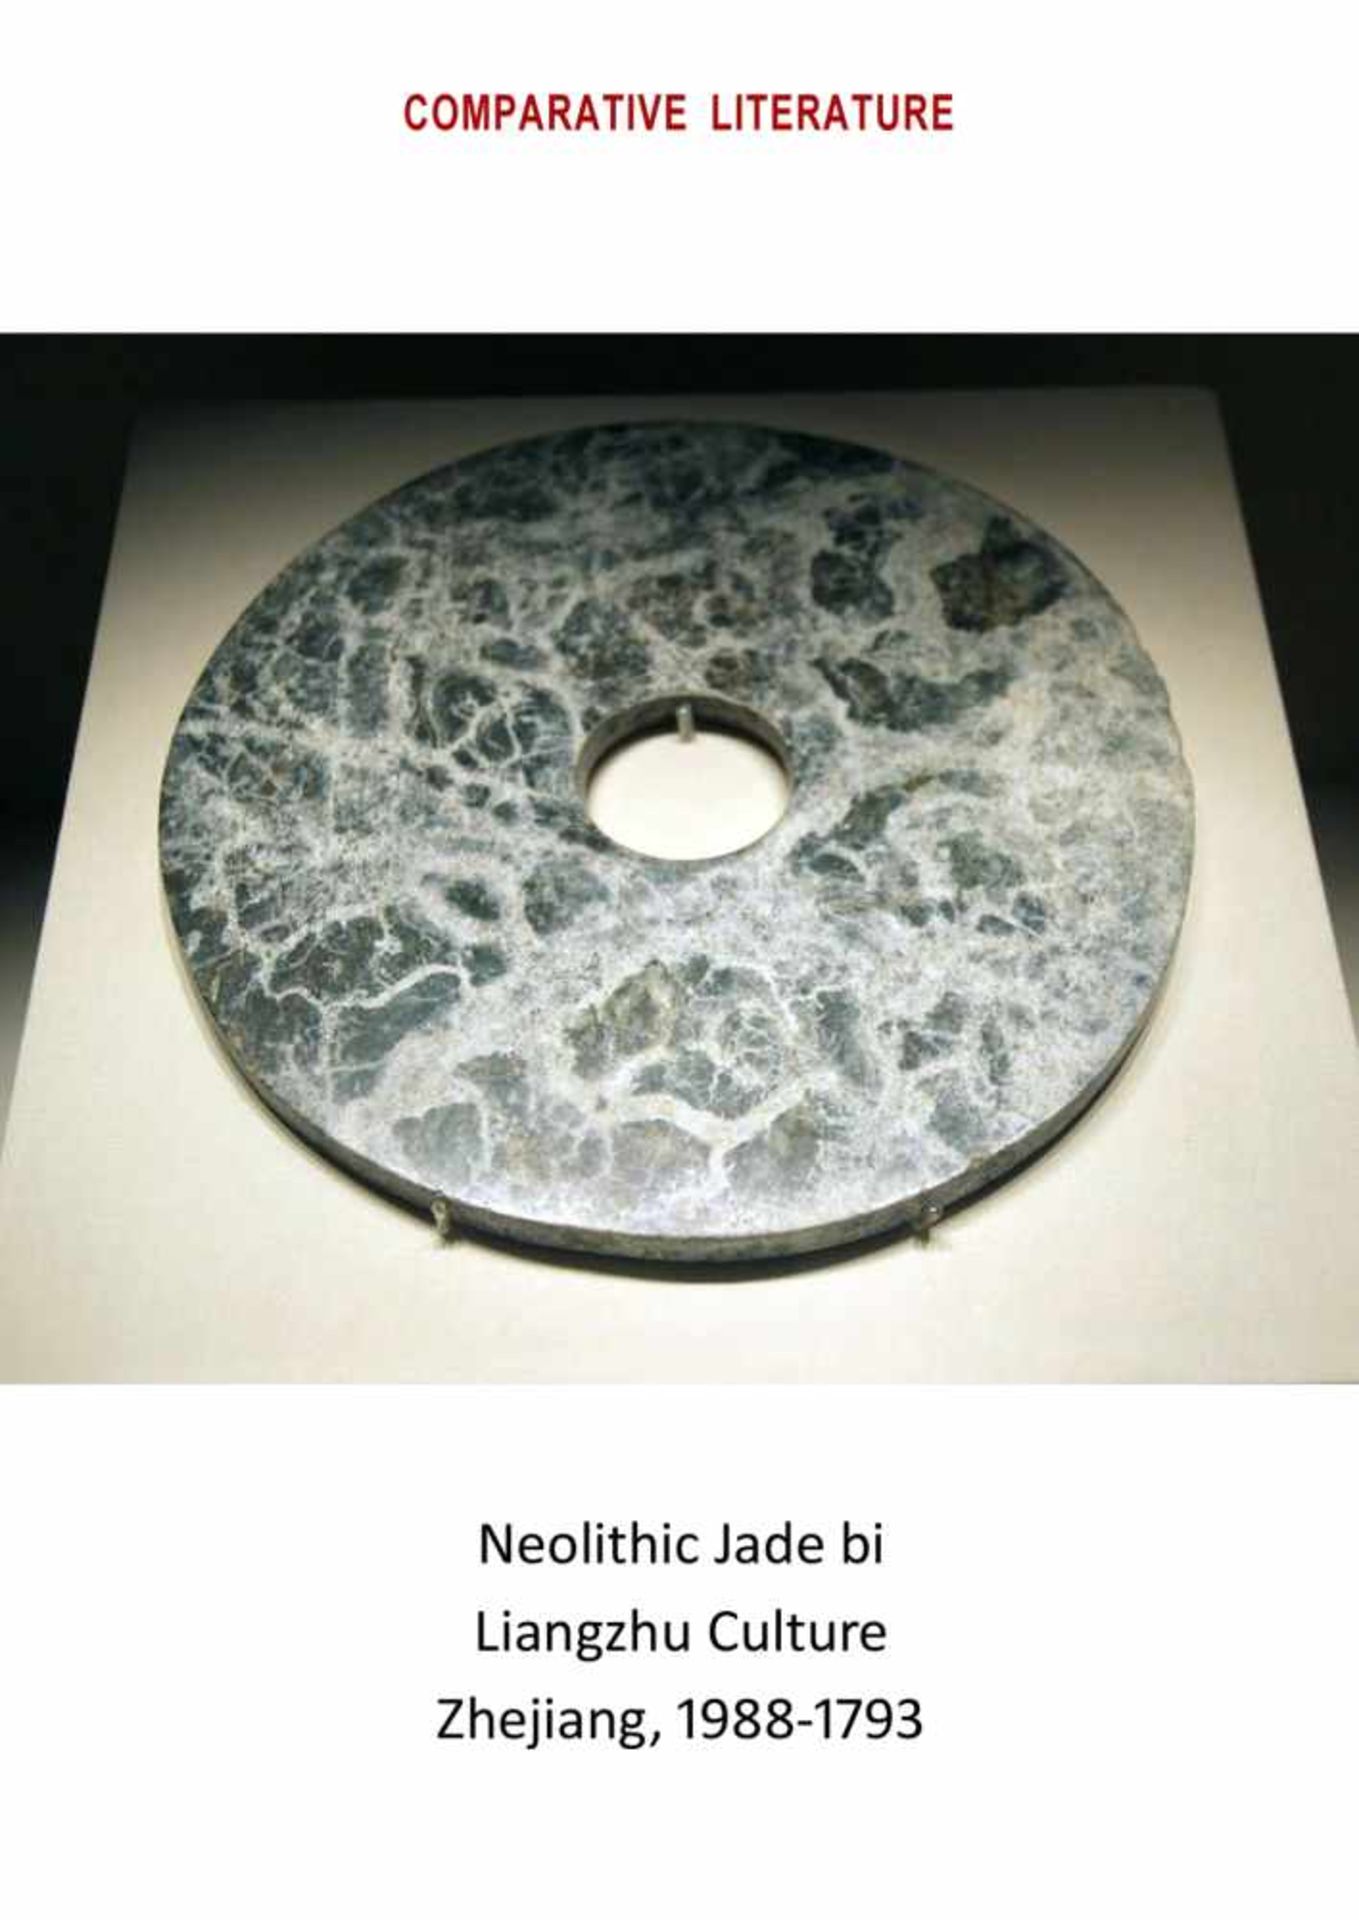 A RICHLY TEXTURED NEOLITHIC BI DISC IN GREEN JADE WITH A STRIKING MARBLE-LIKE PATTERN Jade. China, - Image 8 of 8